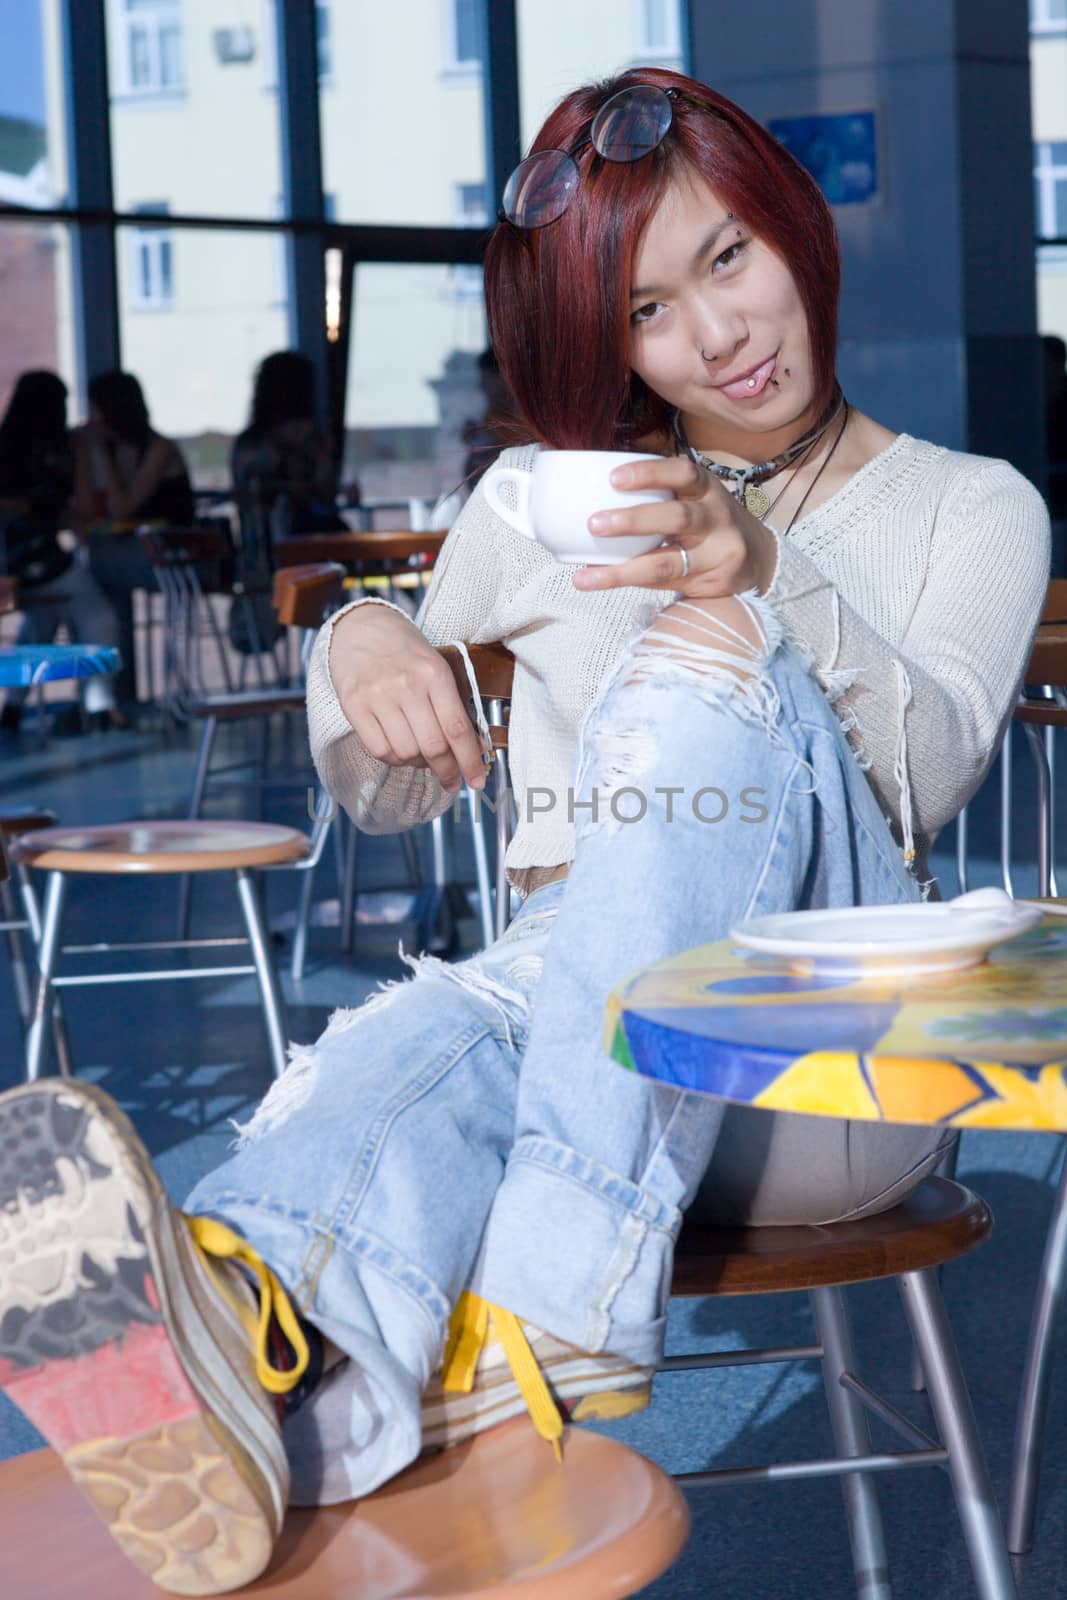 Cafe. Pretty girl having a cup of coffee with a piece of chocolate.